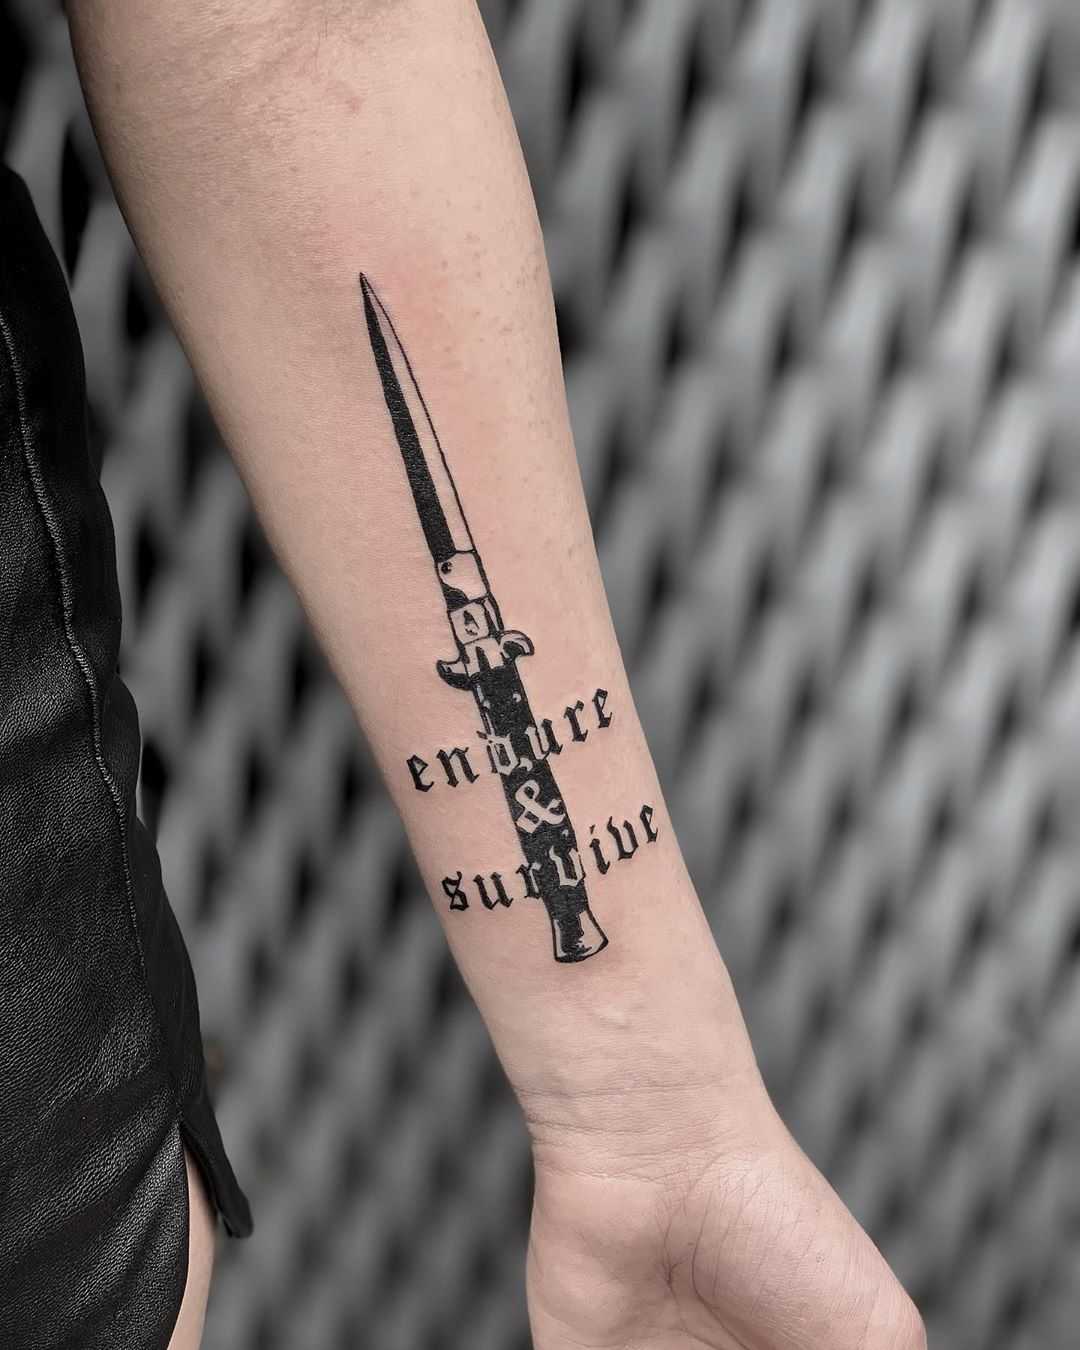 Endure and survive tattoo by Loz McLean